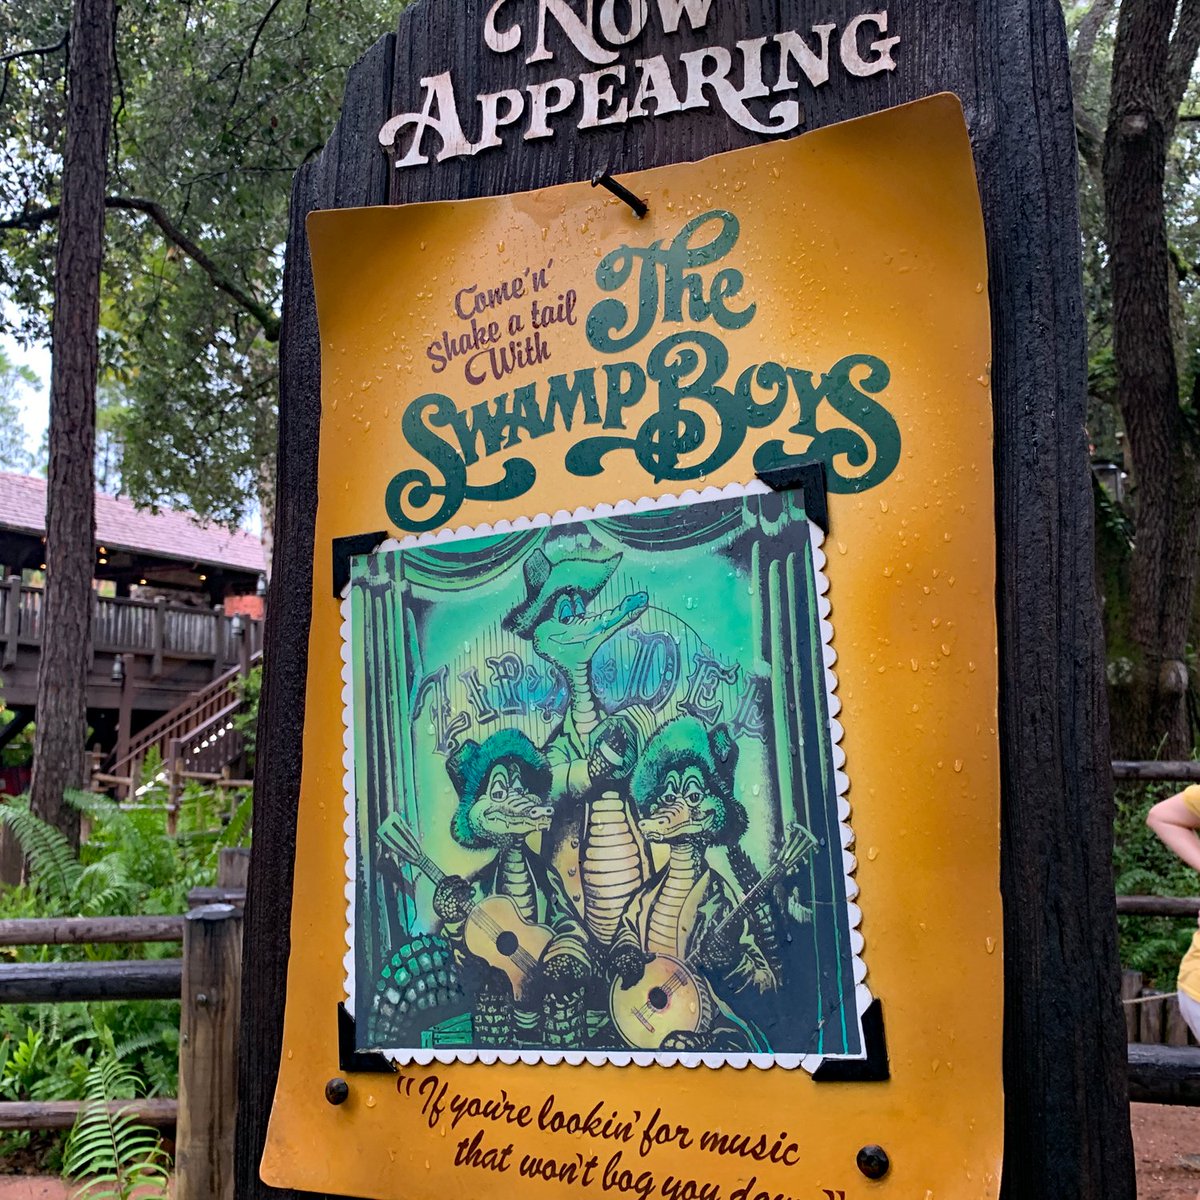 I have many memories of standing in the queue line at Splash Mountain, before the days of FastPass, when one could meet all kinds of interesting people from around the world.